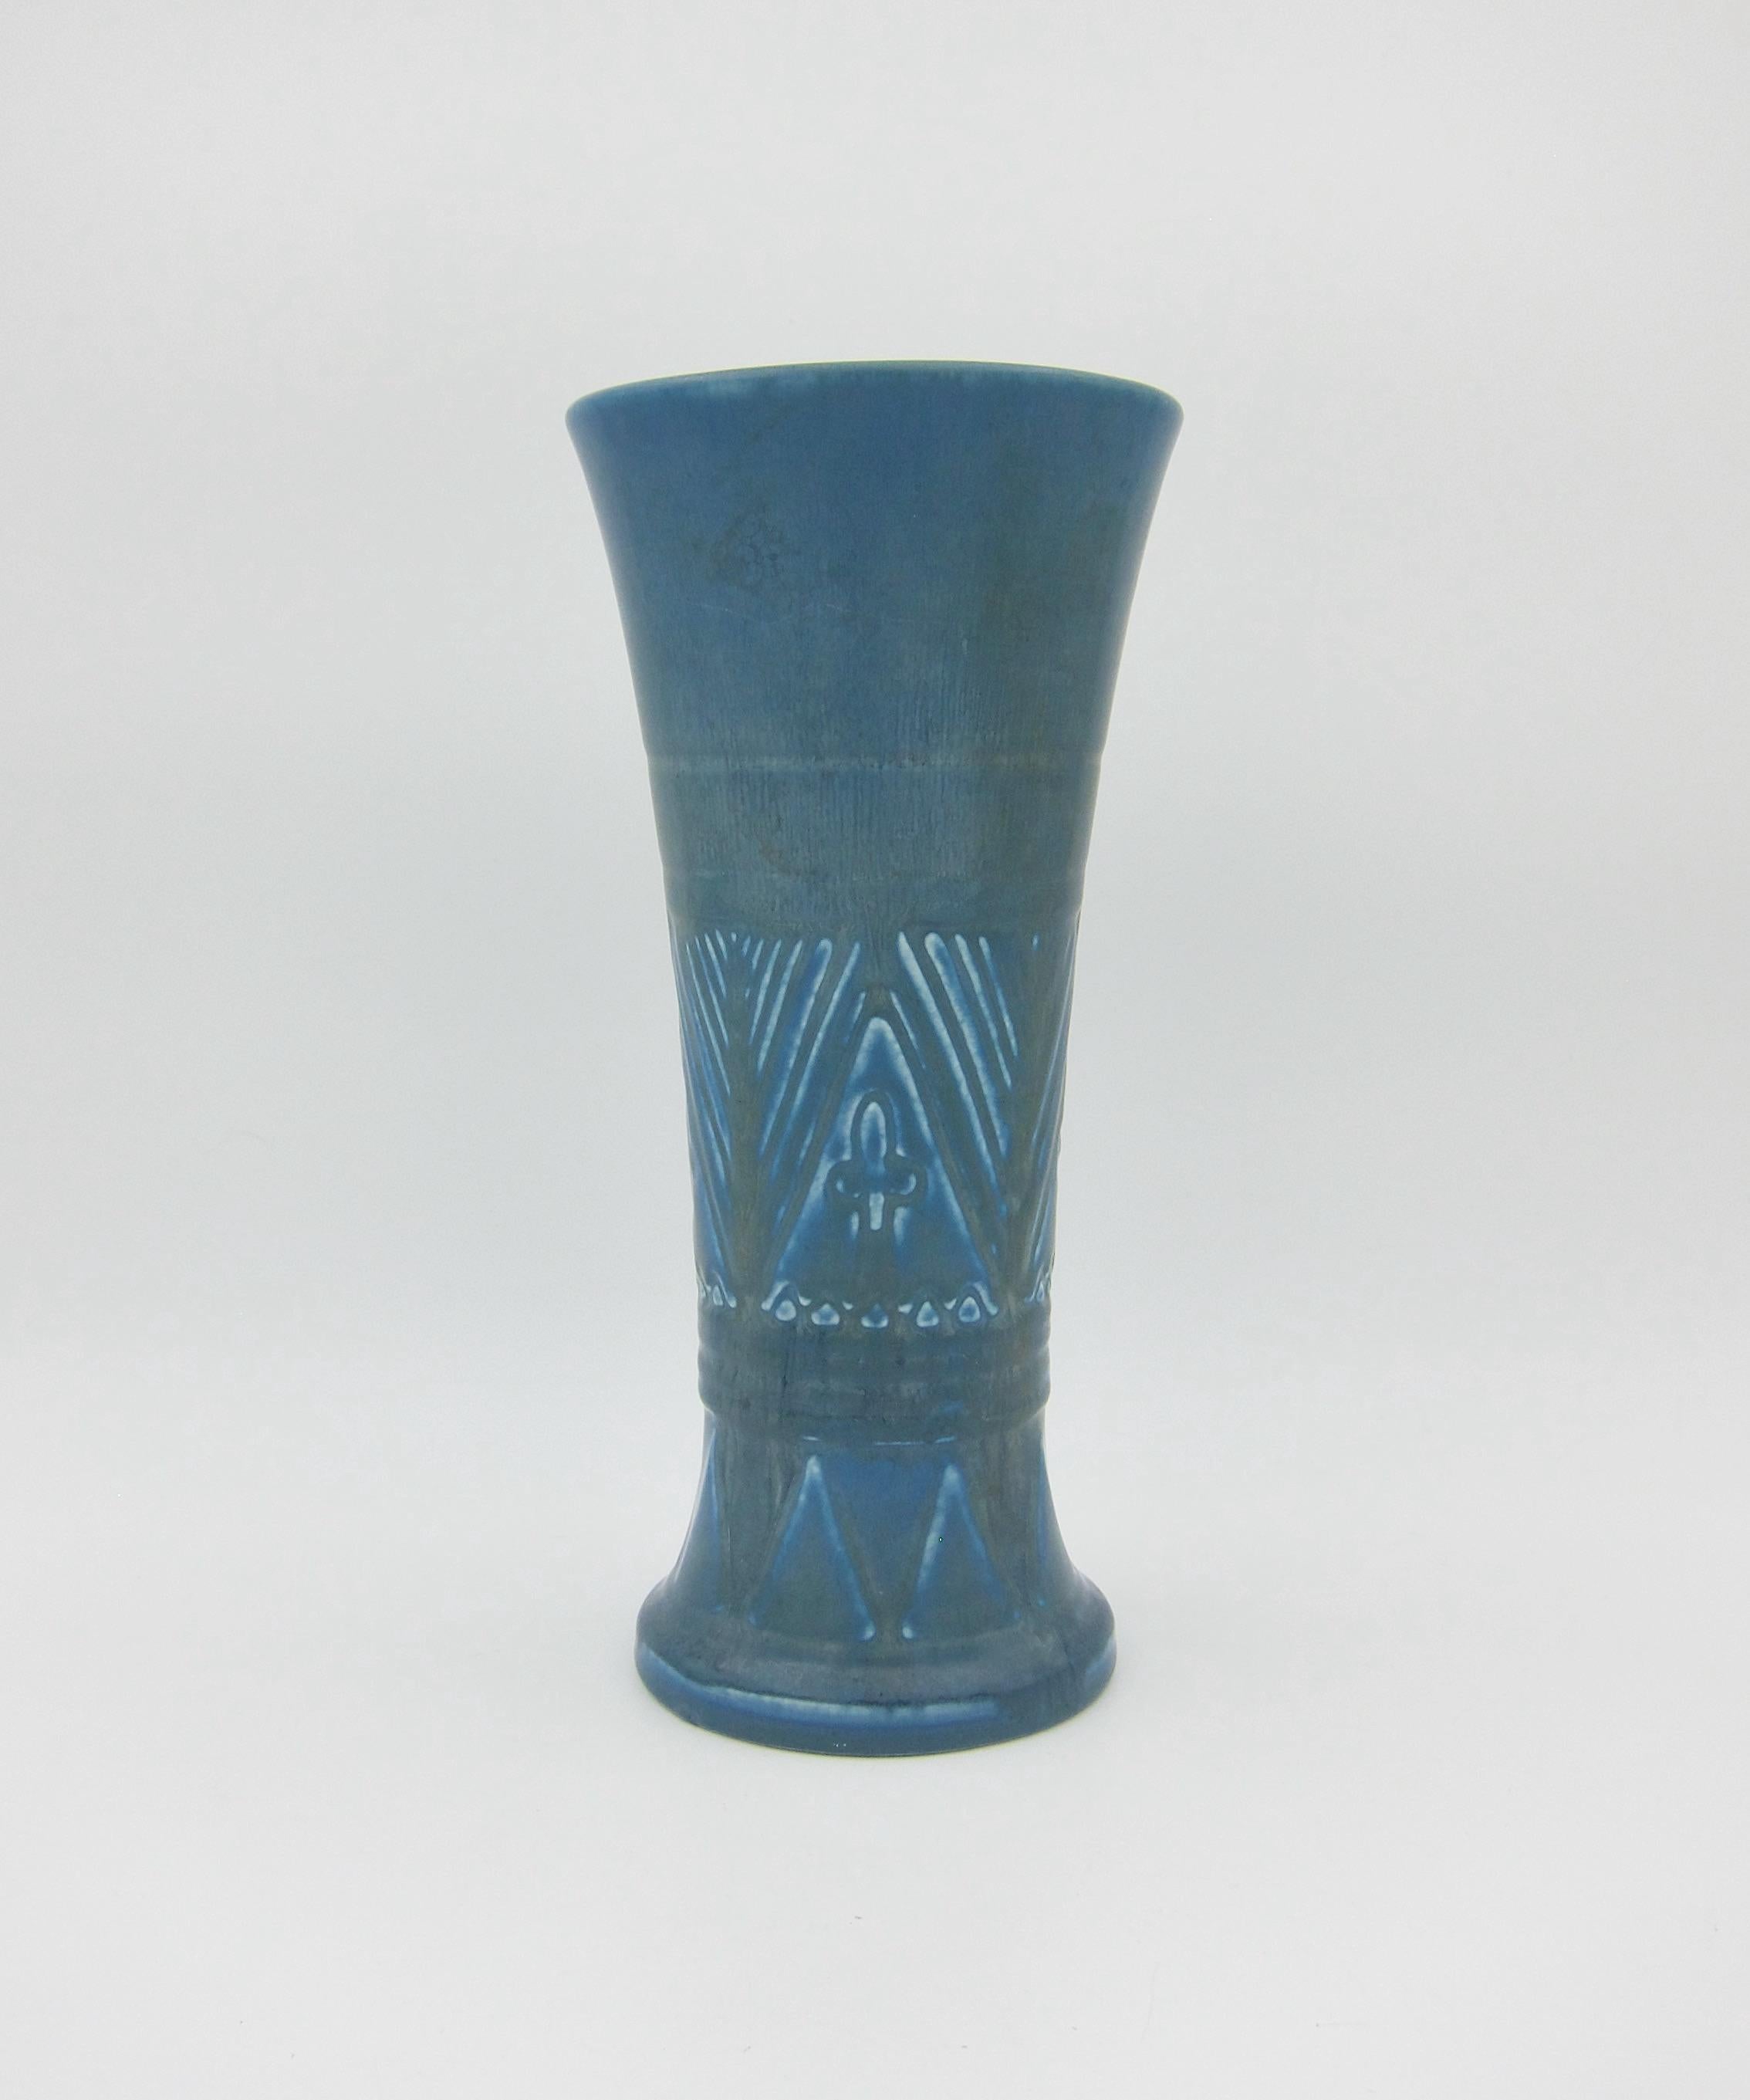 A blue Art Deco vase from Rookwood Pottery of Cincinnati, Ohio date marked for 1926. The American art pottery vessel is a substantial production piece with geometric Art Deco designs and a velvety mottled matte blue glaze with accents of olive